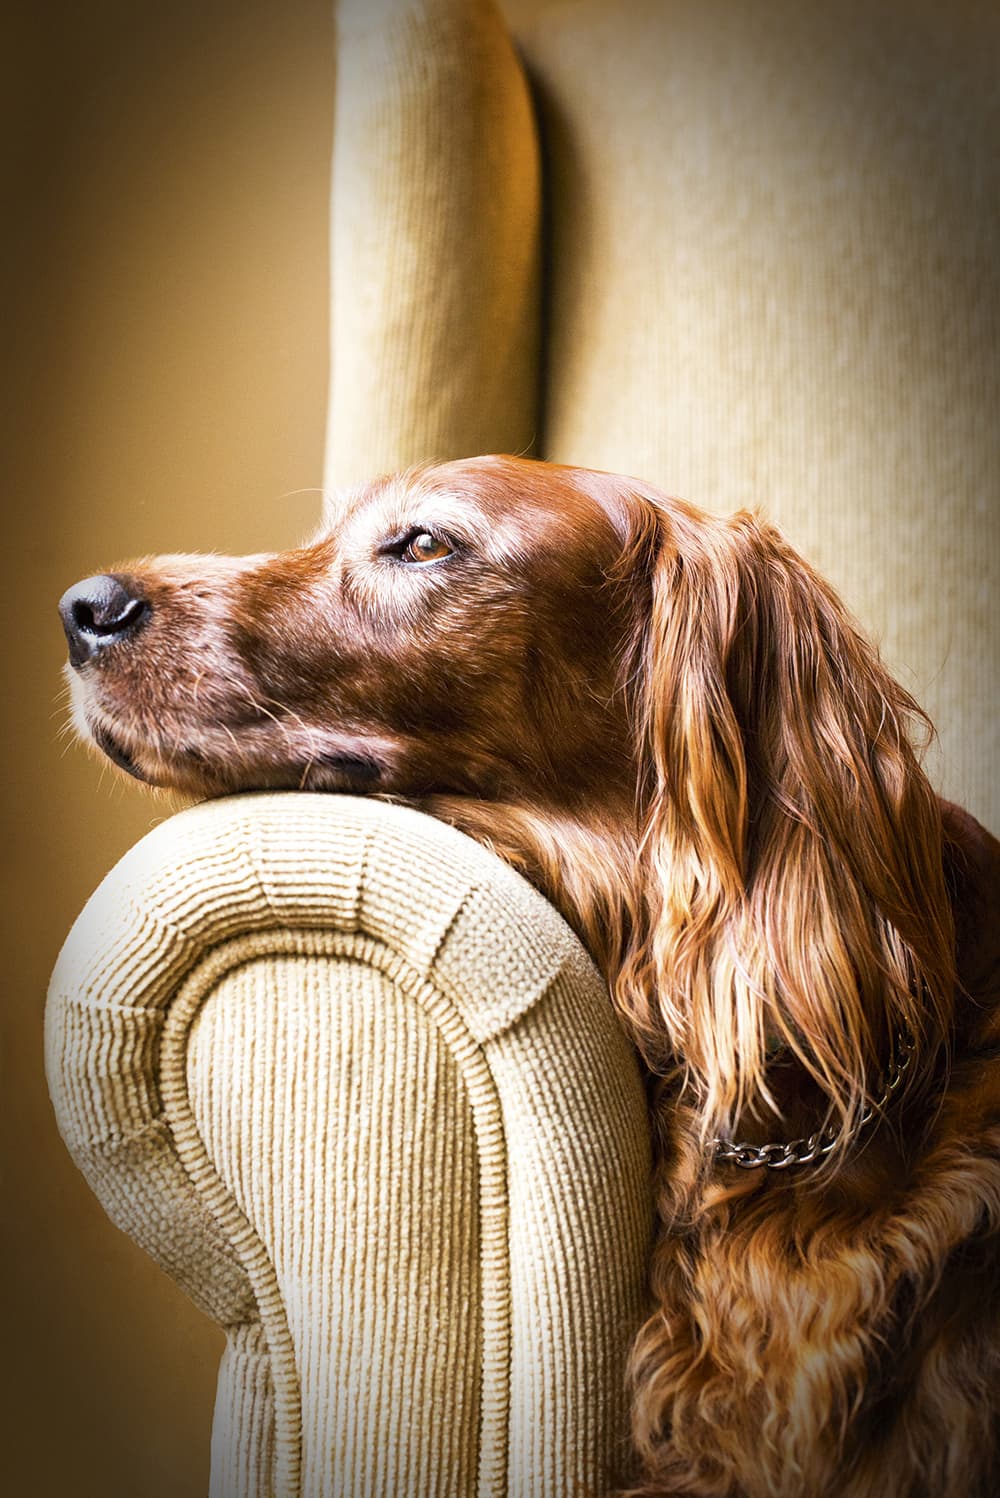 Dog Photographer of the Year 2015 Oldies 2nd Place Adriana Bernal The Kennel Club